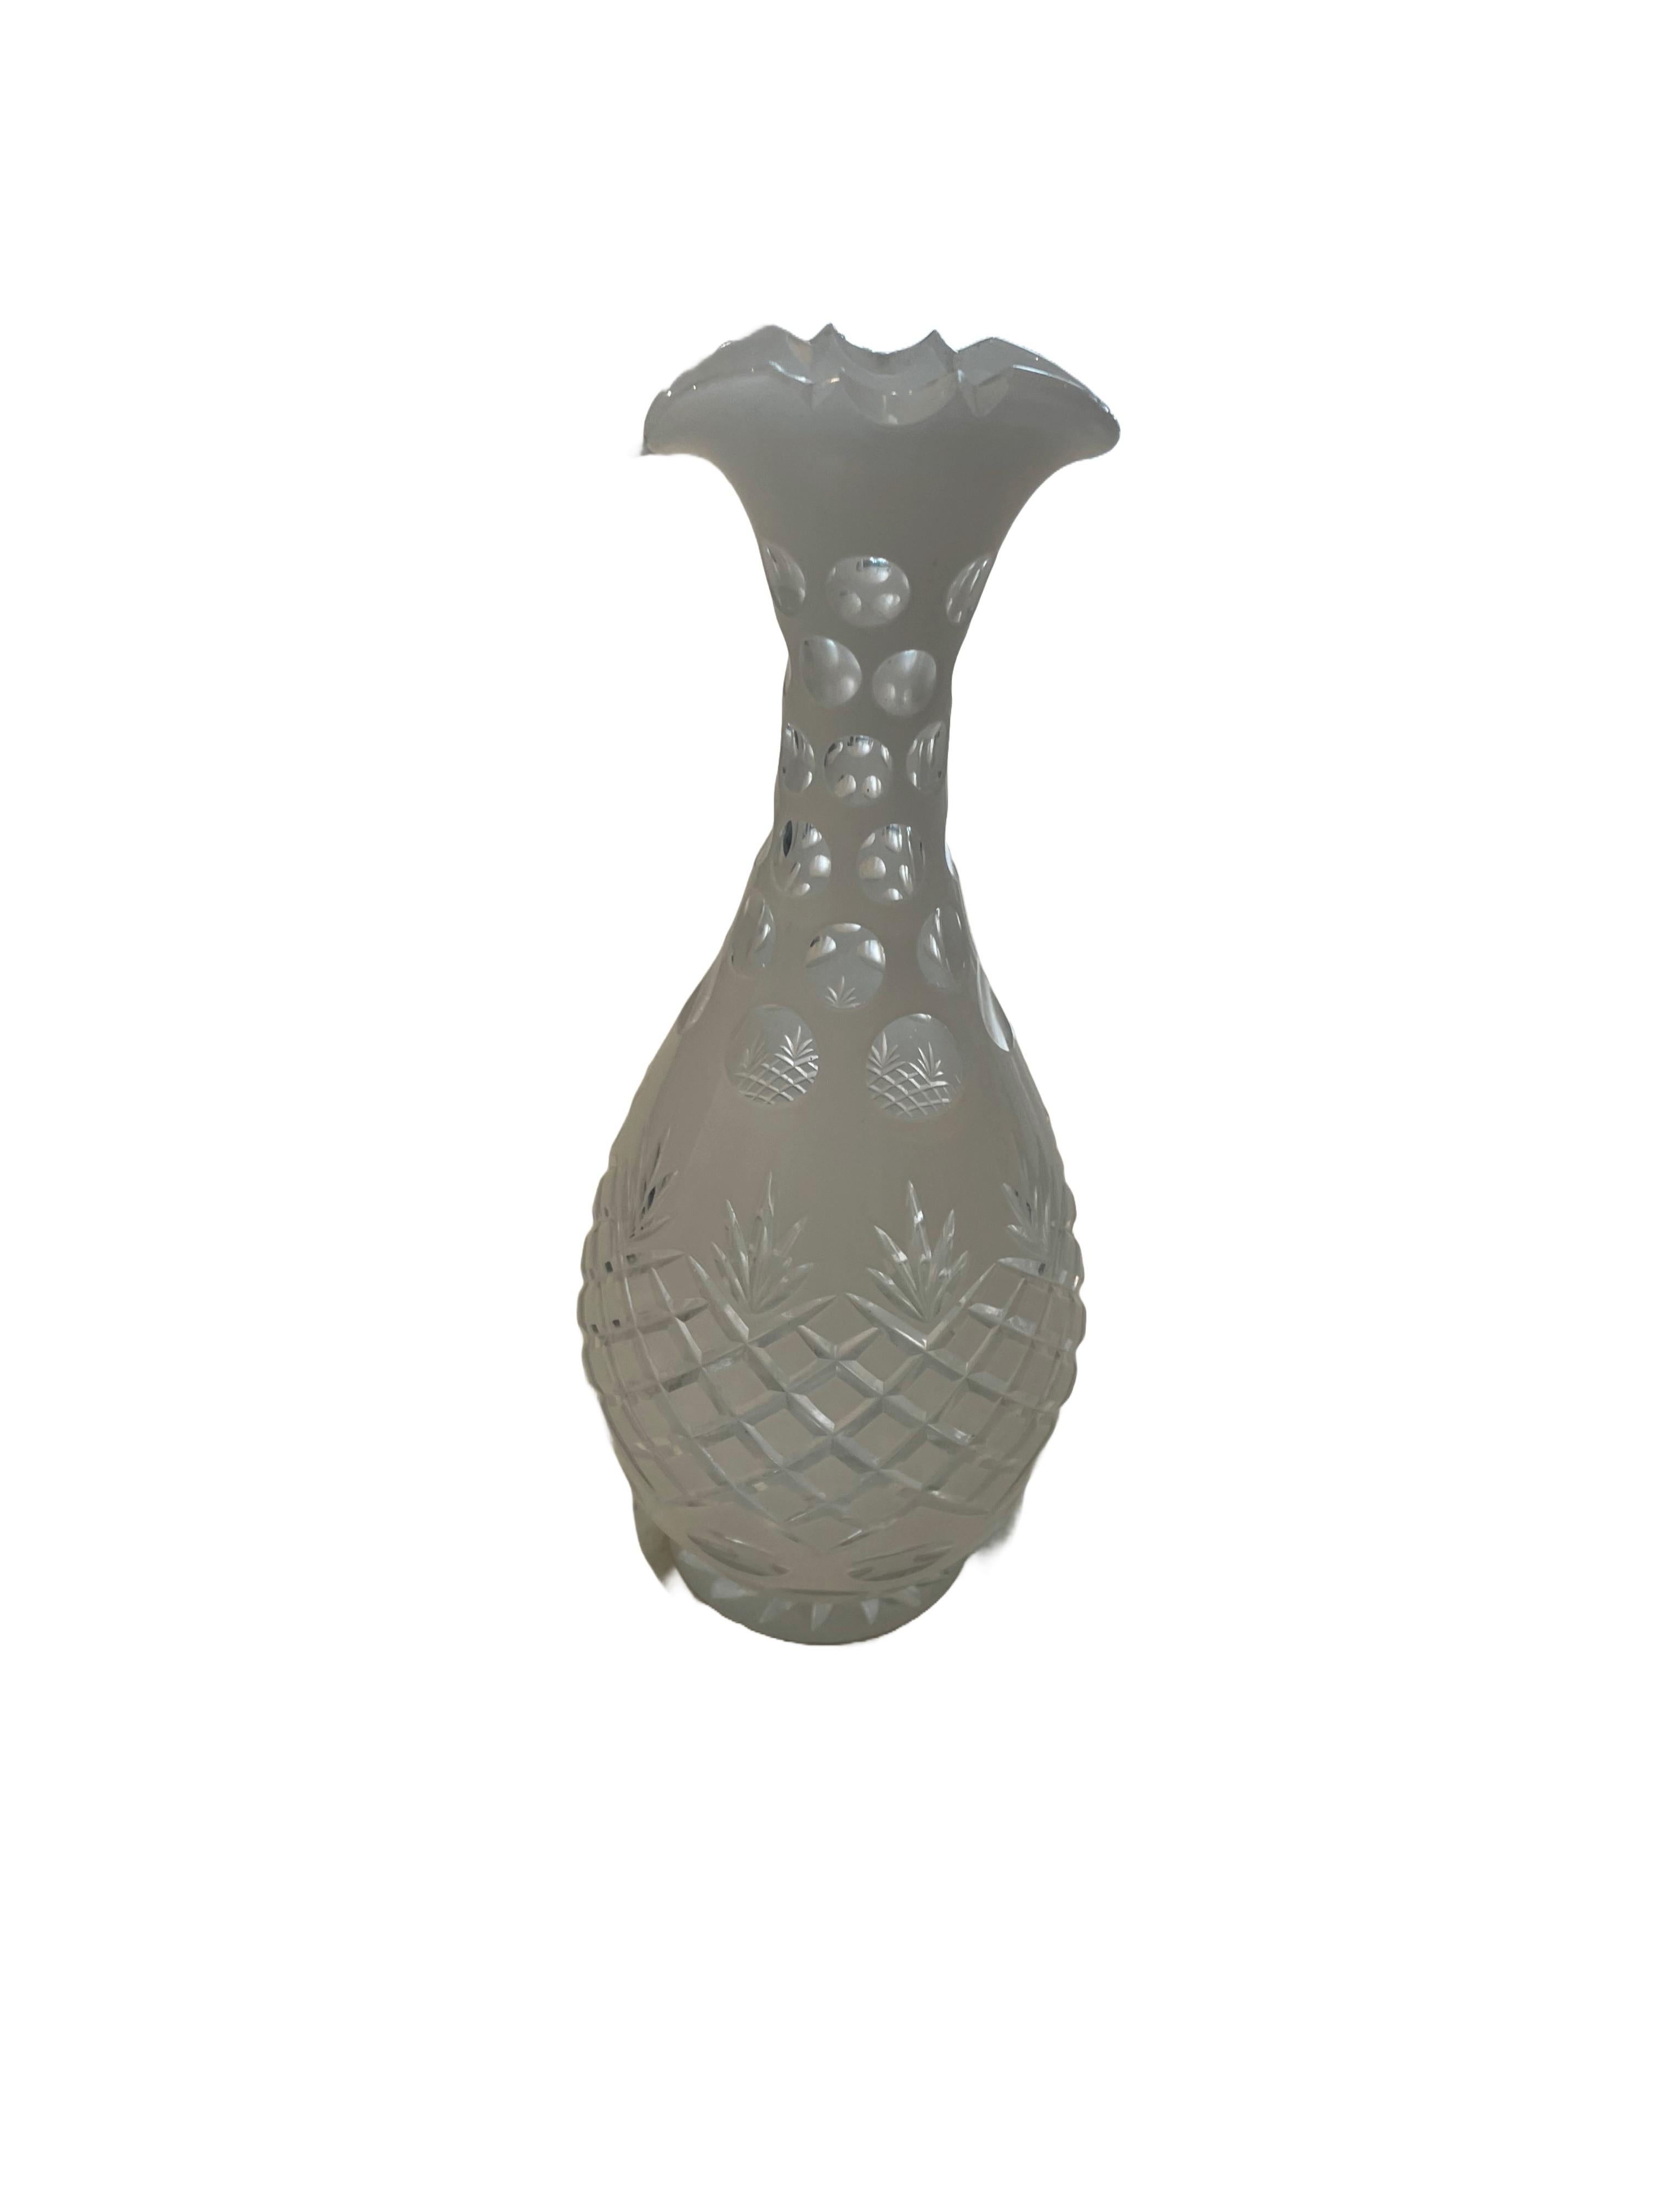 Made by the Bohemian Art Glass manufacturers of the 19th Century, this, Cut-to-Clear glass with white opaline glass overlay is hand-cut in a whimsical pattern that is harmonious with its contoured shape. This decorative piece is ideal as a vase.